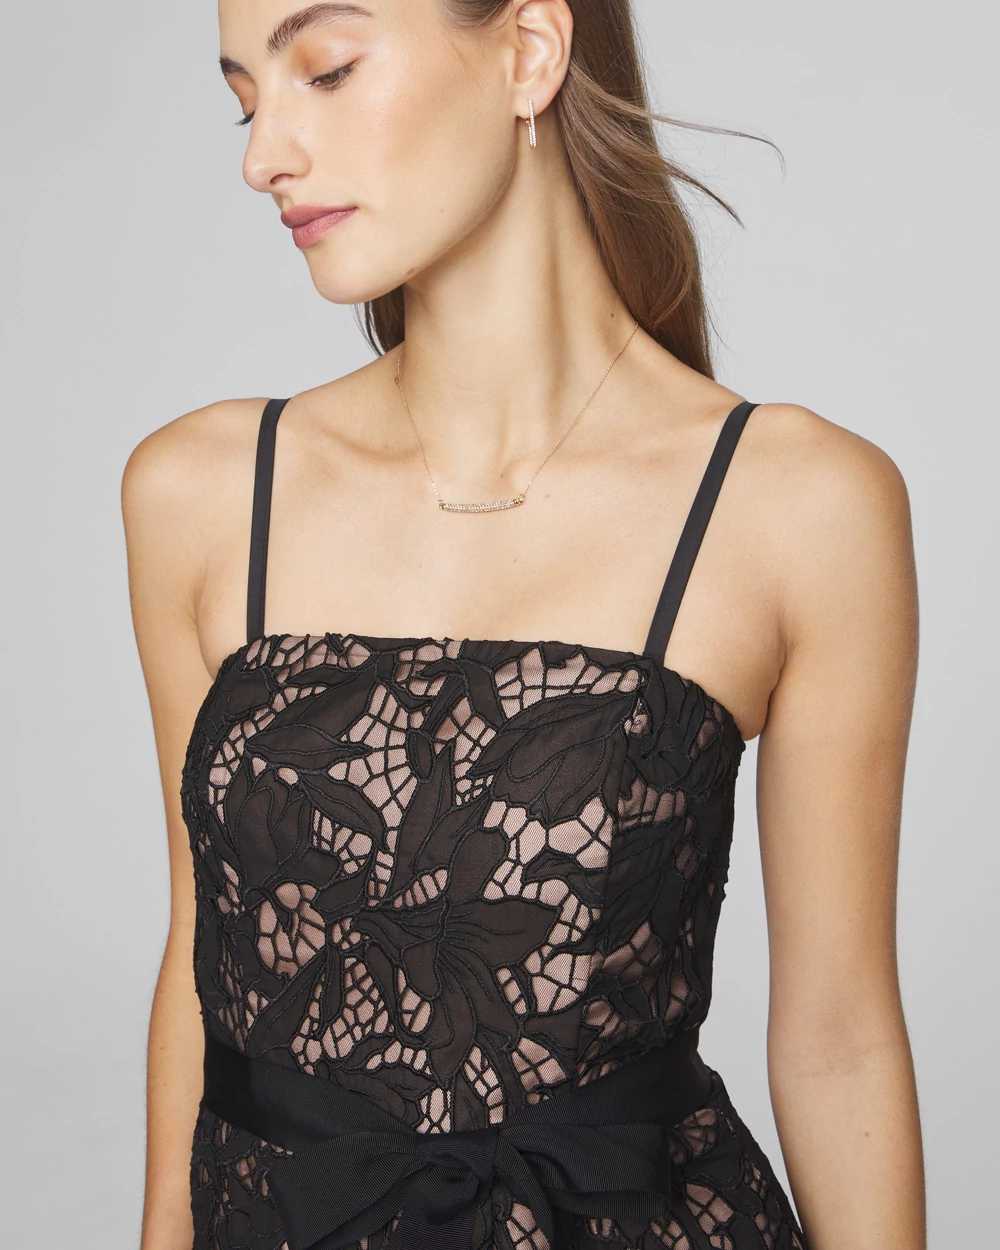 Strapless Lace Fit & Flare Midi Dress click to view larger image.